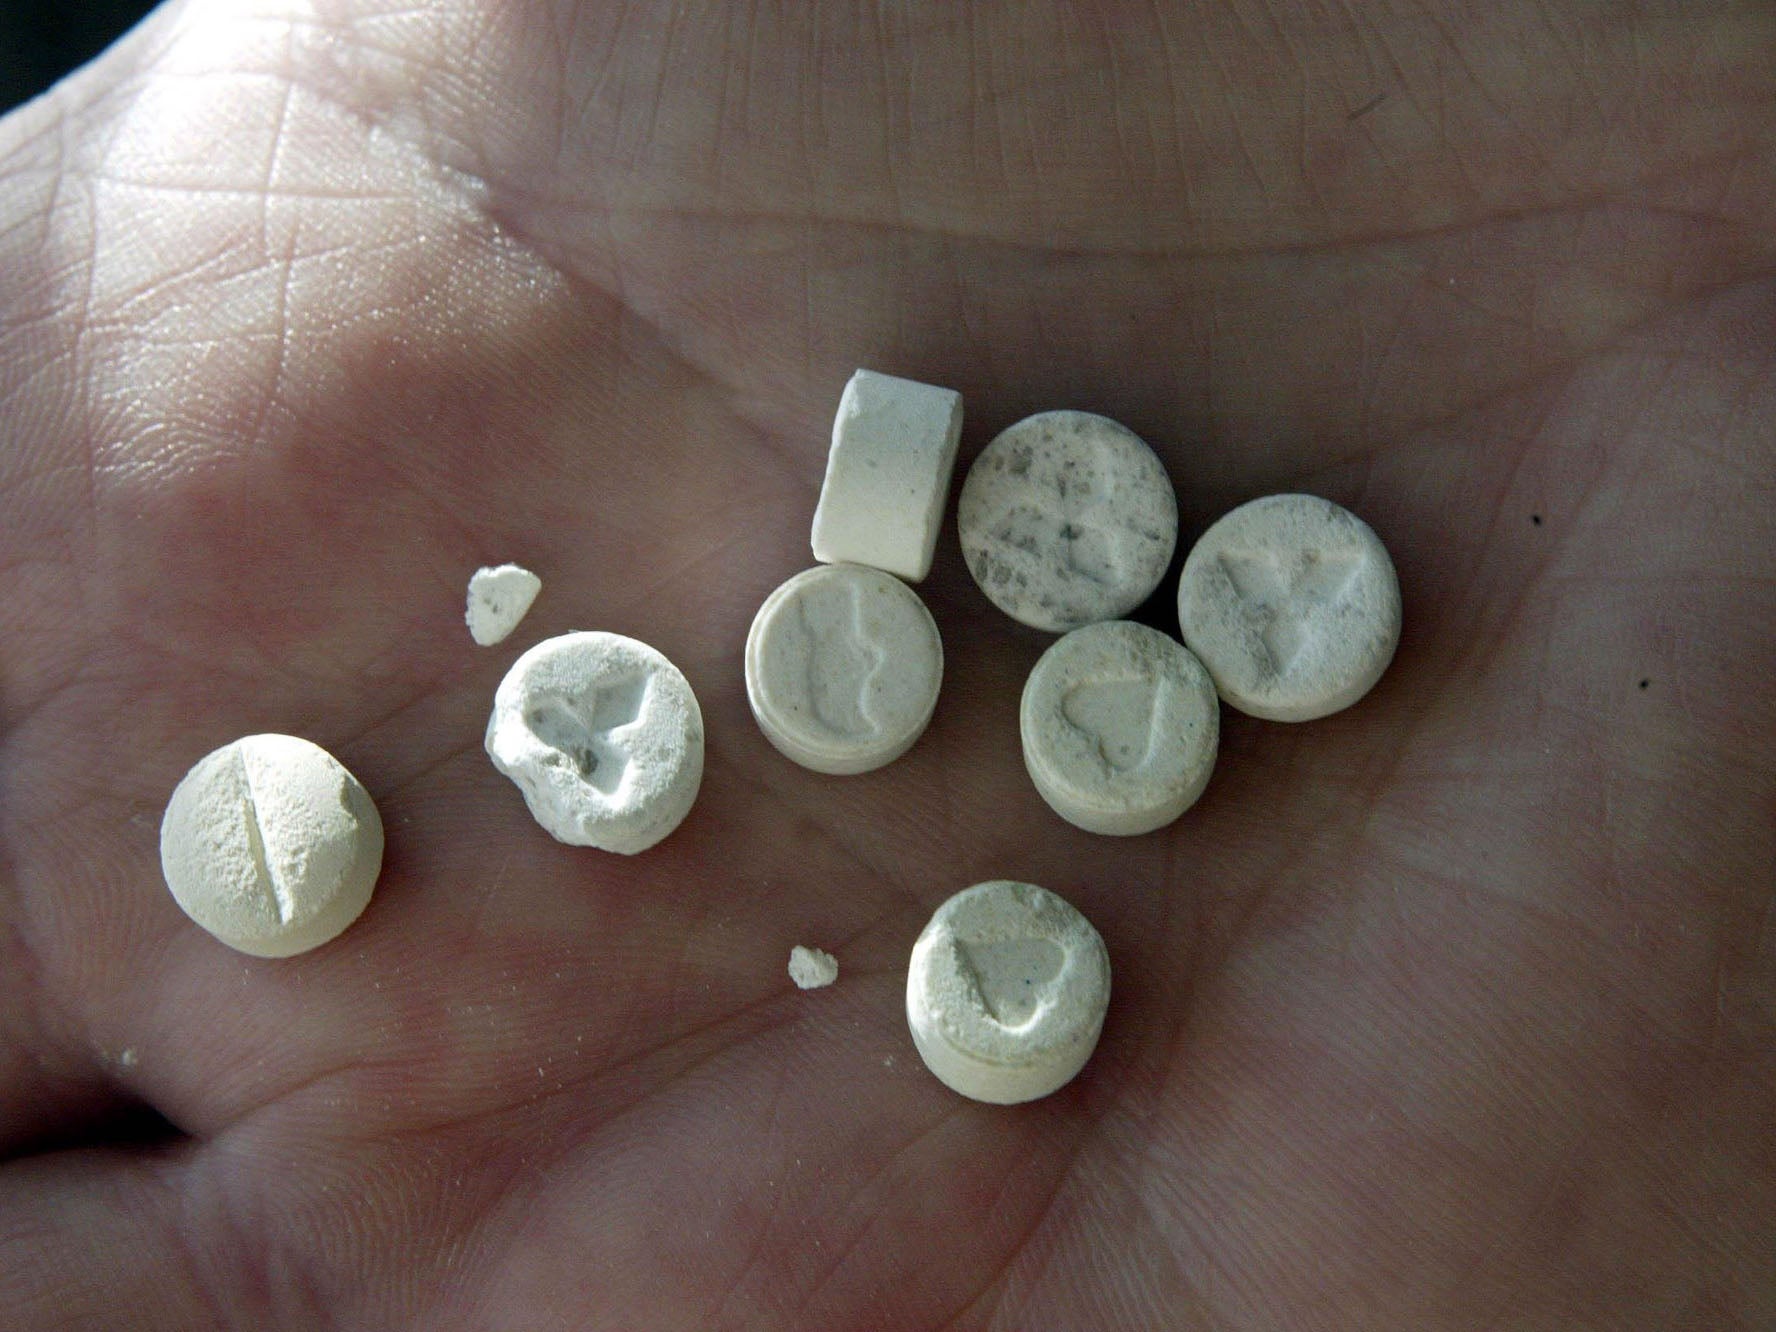 drugs xtc party amateur mdma molly